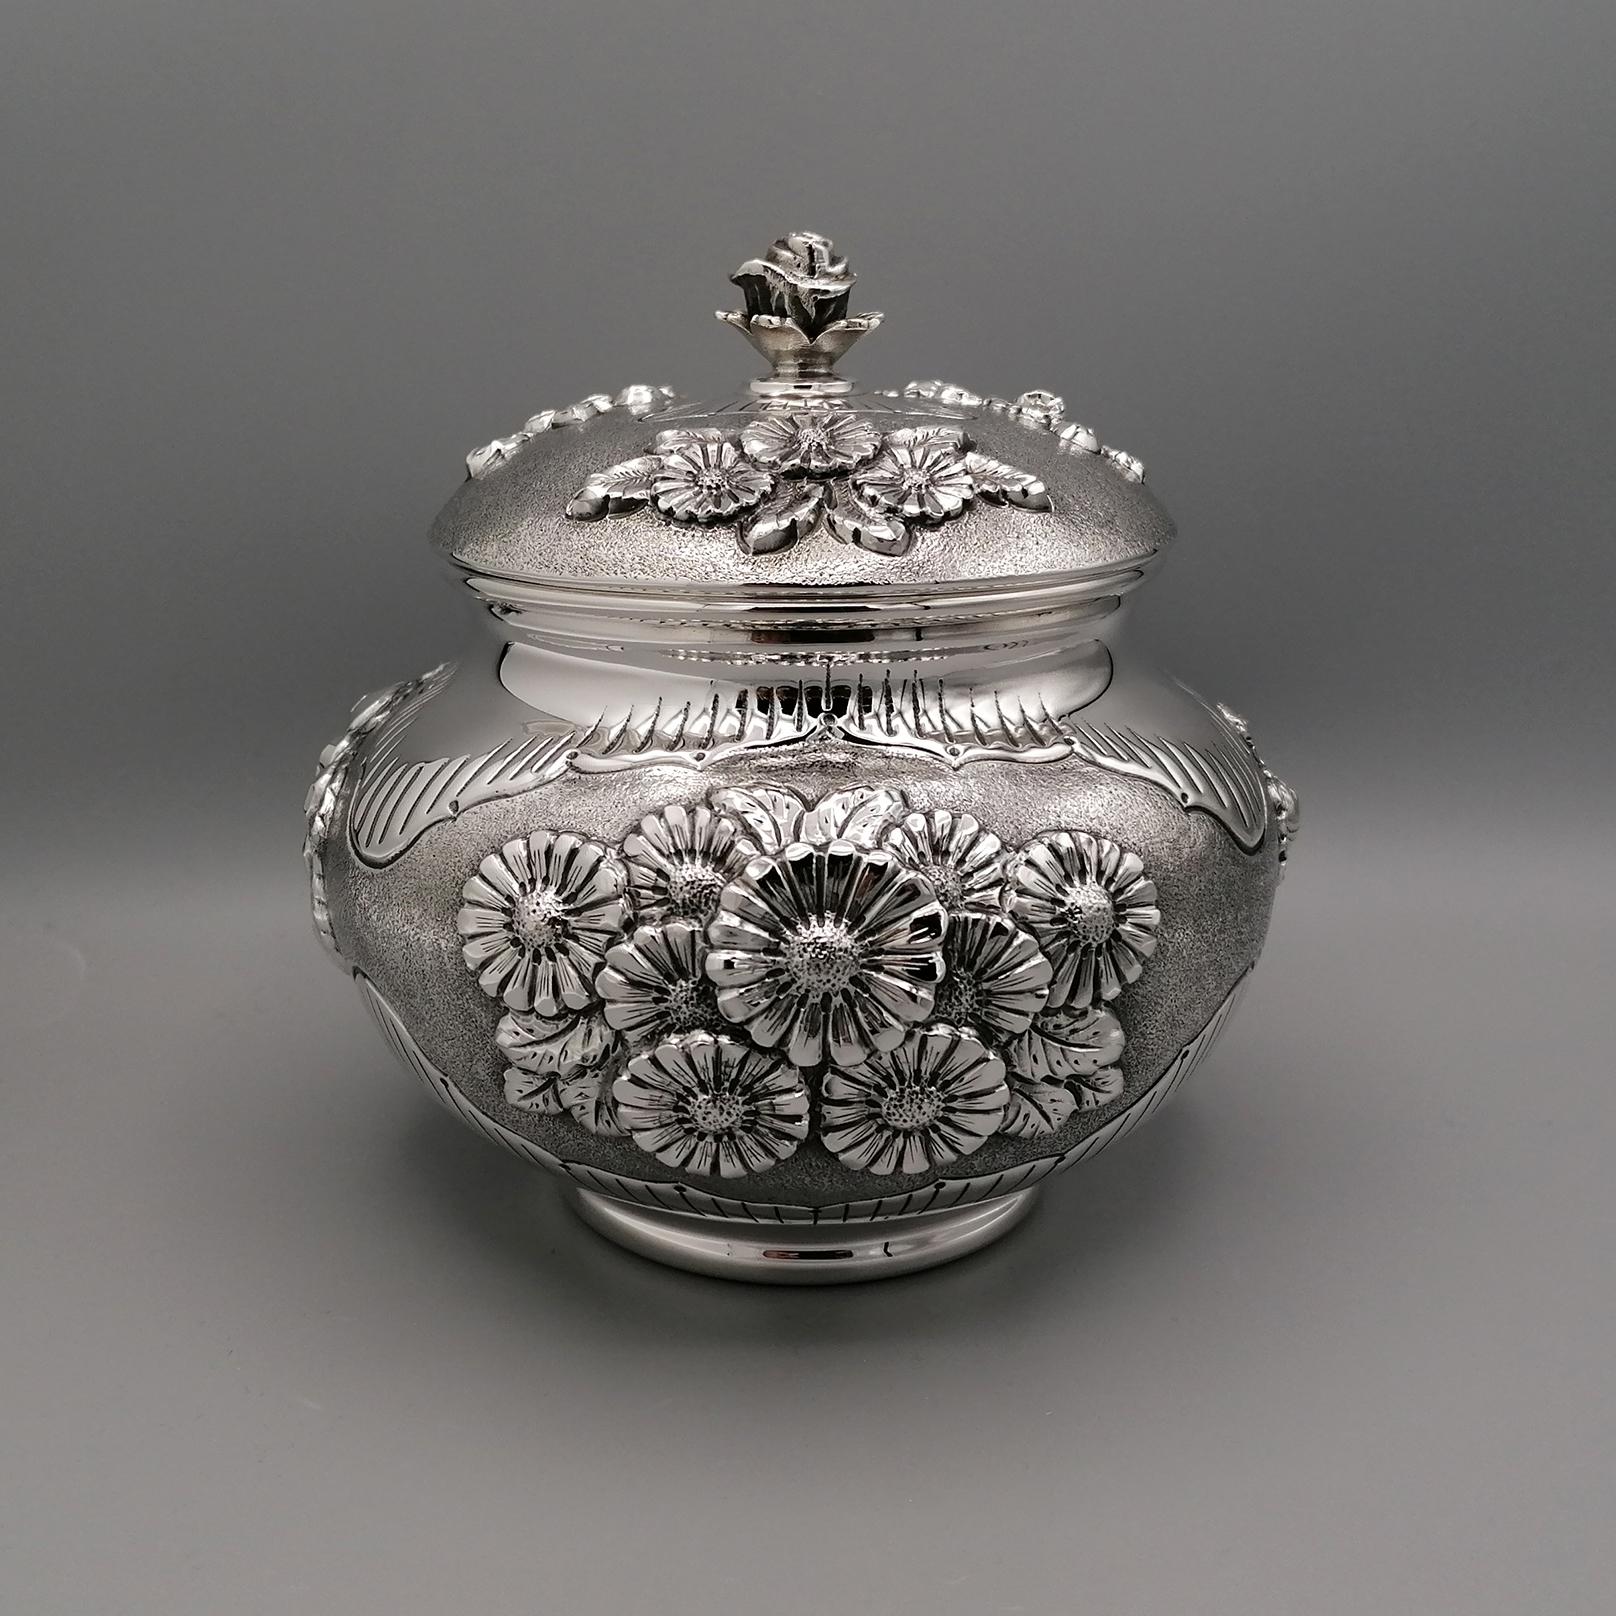 Completely handmade sterling silver candy box.
The box is round and pot-bellied.
Embossments and chisels of flowers were made all over the body.
The box is divided into three sectors, divided by different embossed flowers.
Daisies, Roses and